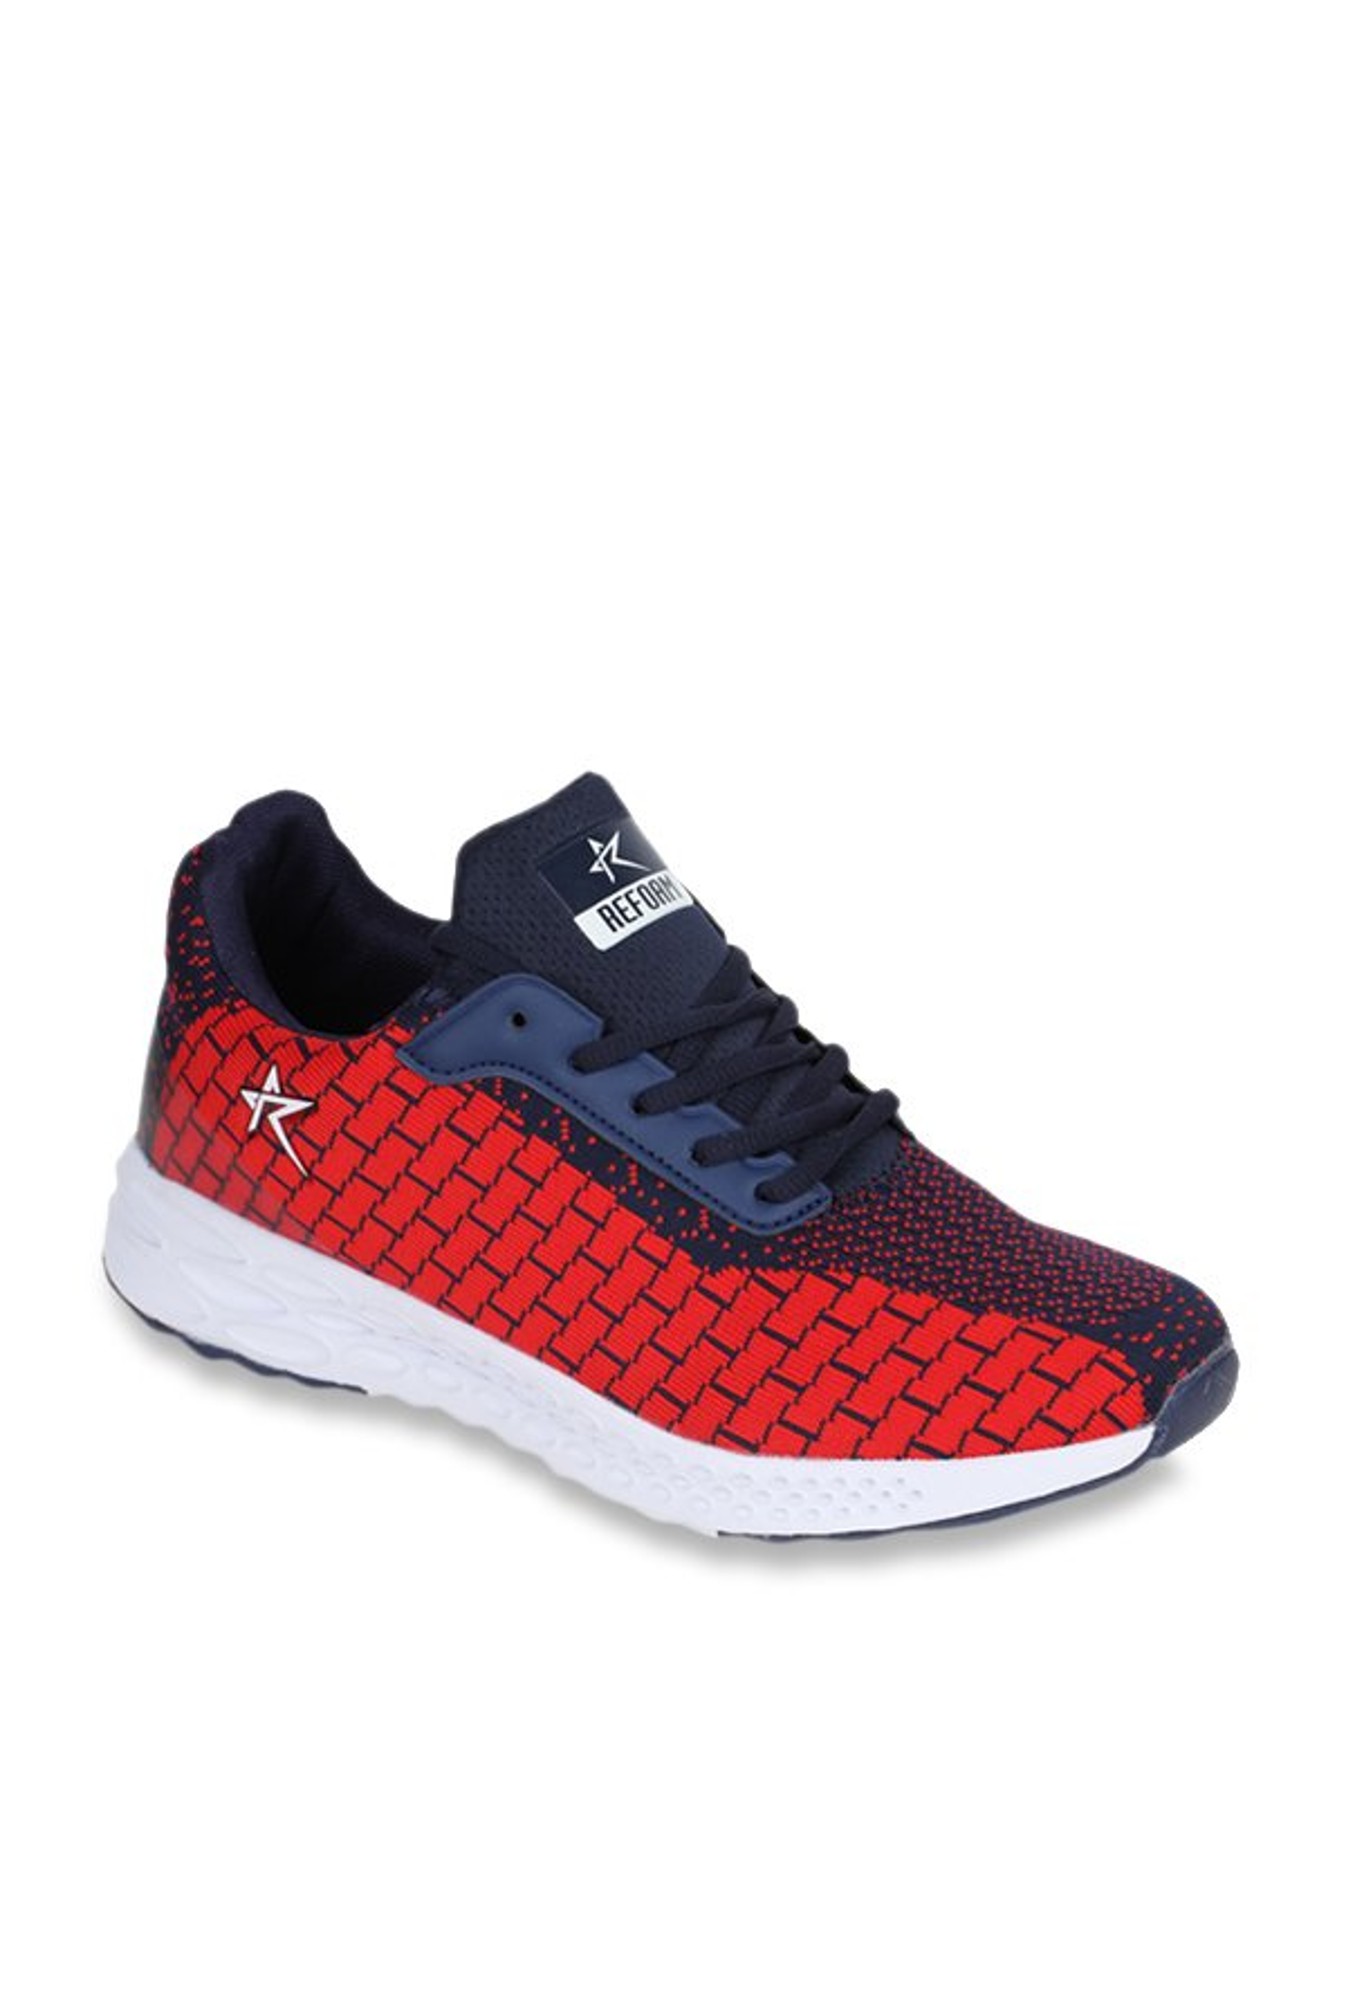 Buy REFOAM Men's Navy Textile Lace-Up Sport Running Shoes 9 at Amazon.in